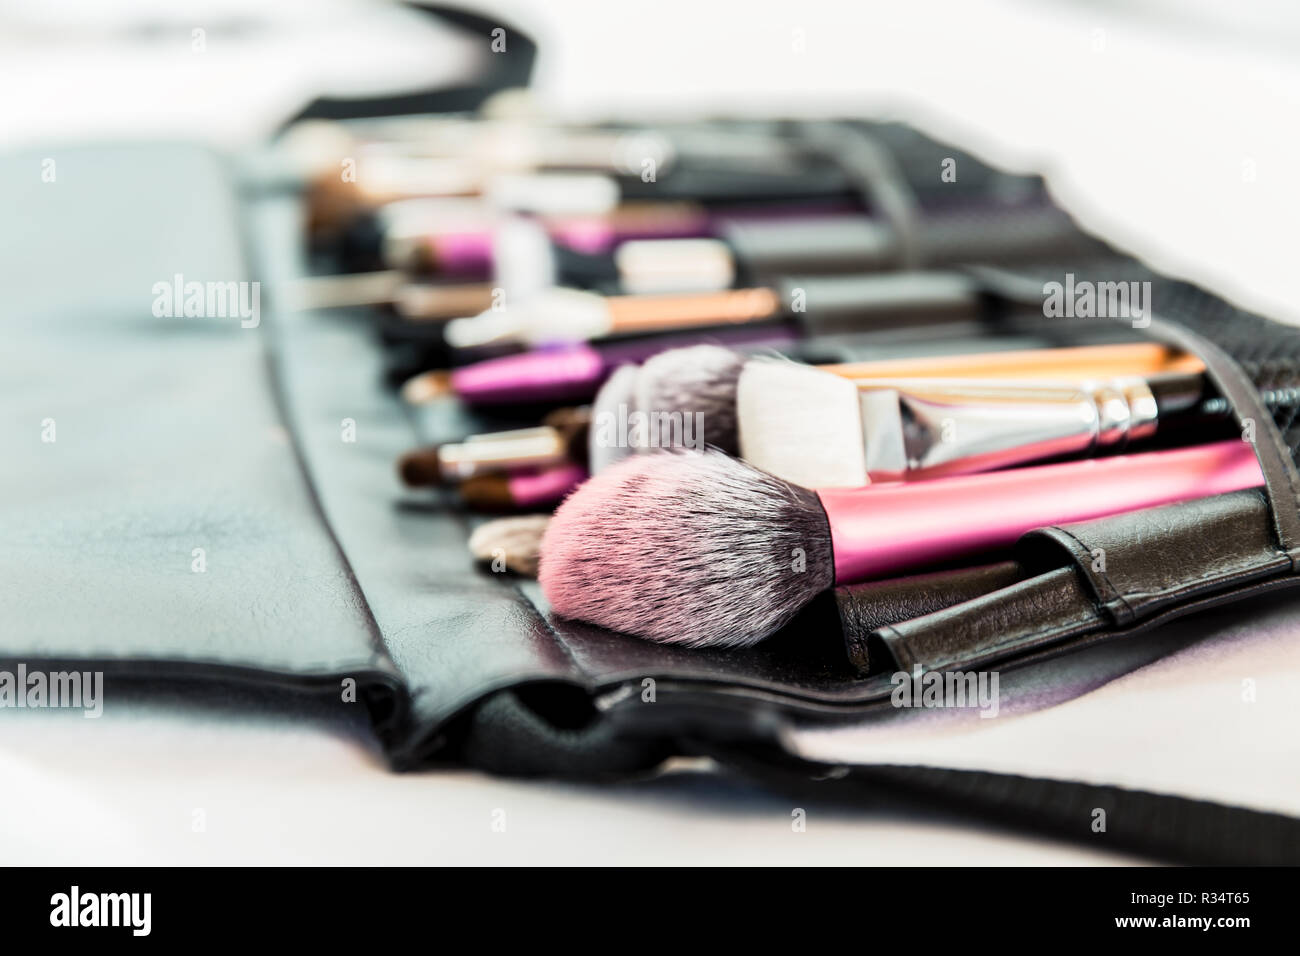 Set of different make-up used brushes Stock Photo